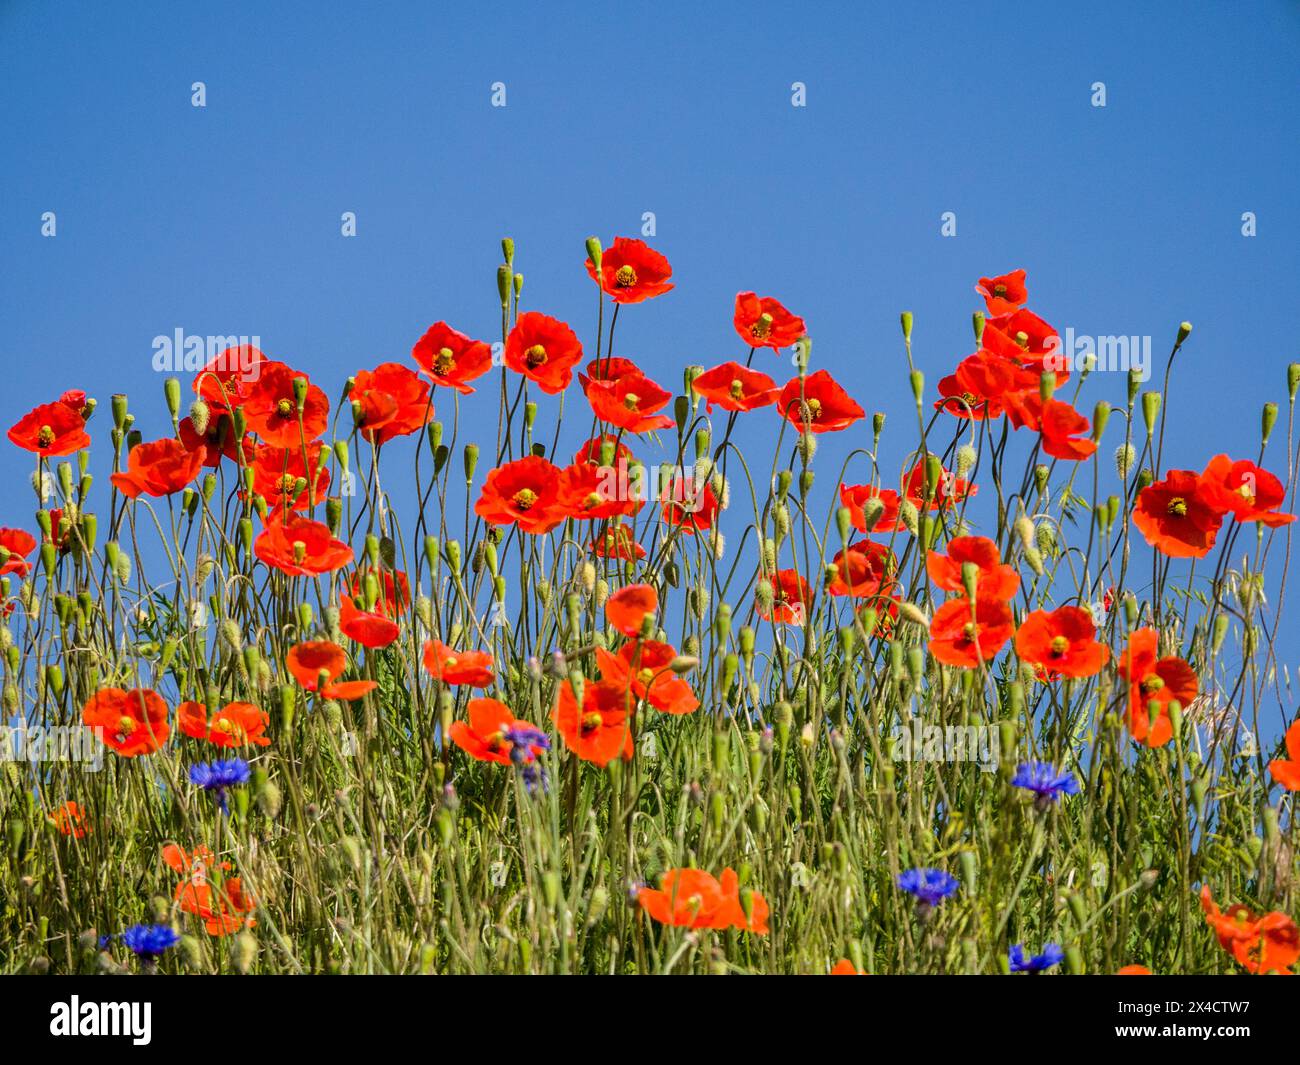 USA, Washington State, Palouse. Bright red poppies and blue bachelor button flowers with bright blue sky. Stock Photo